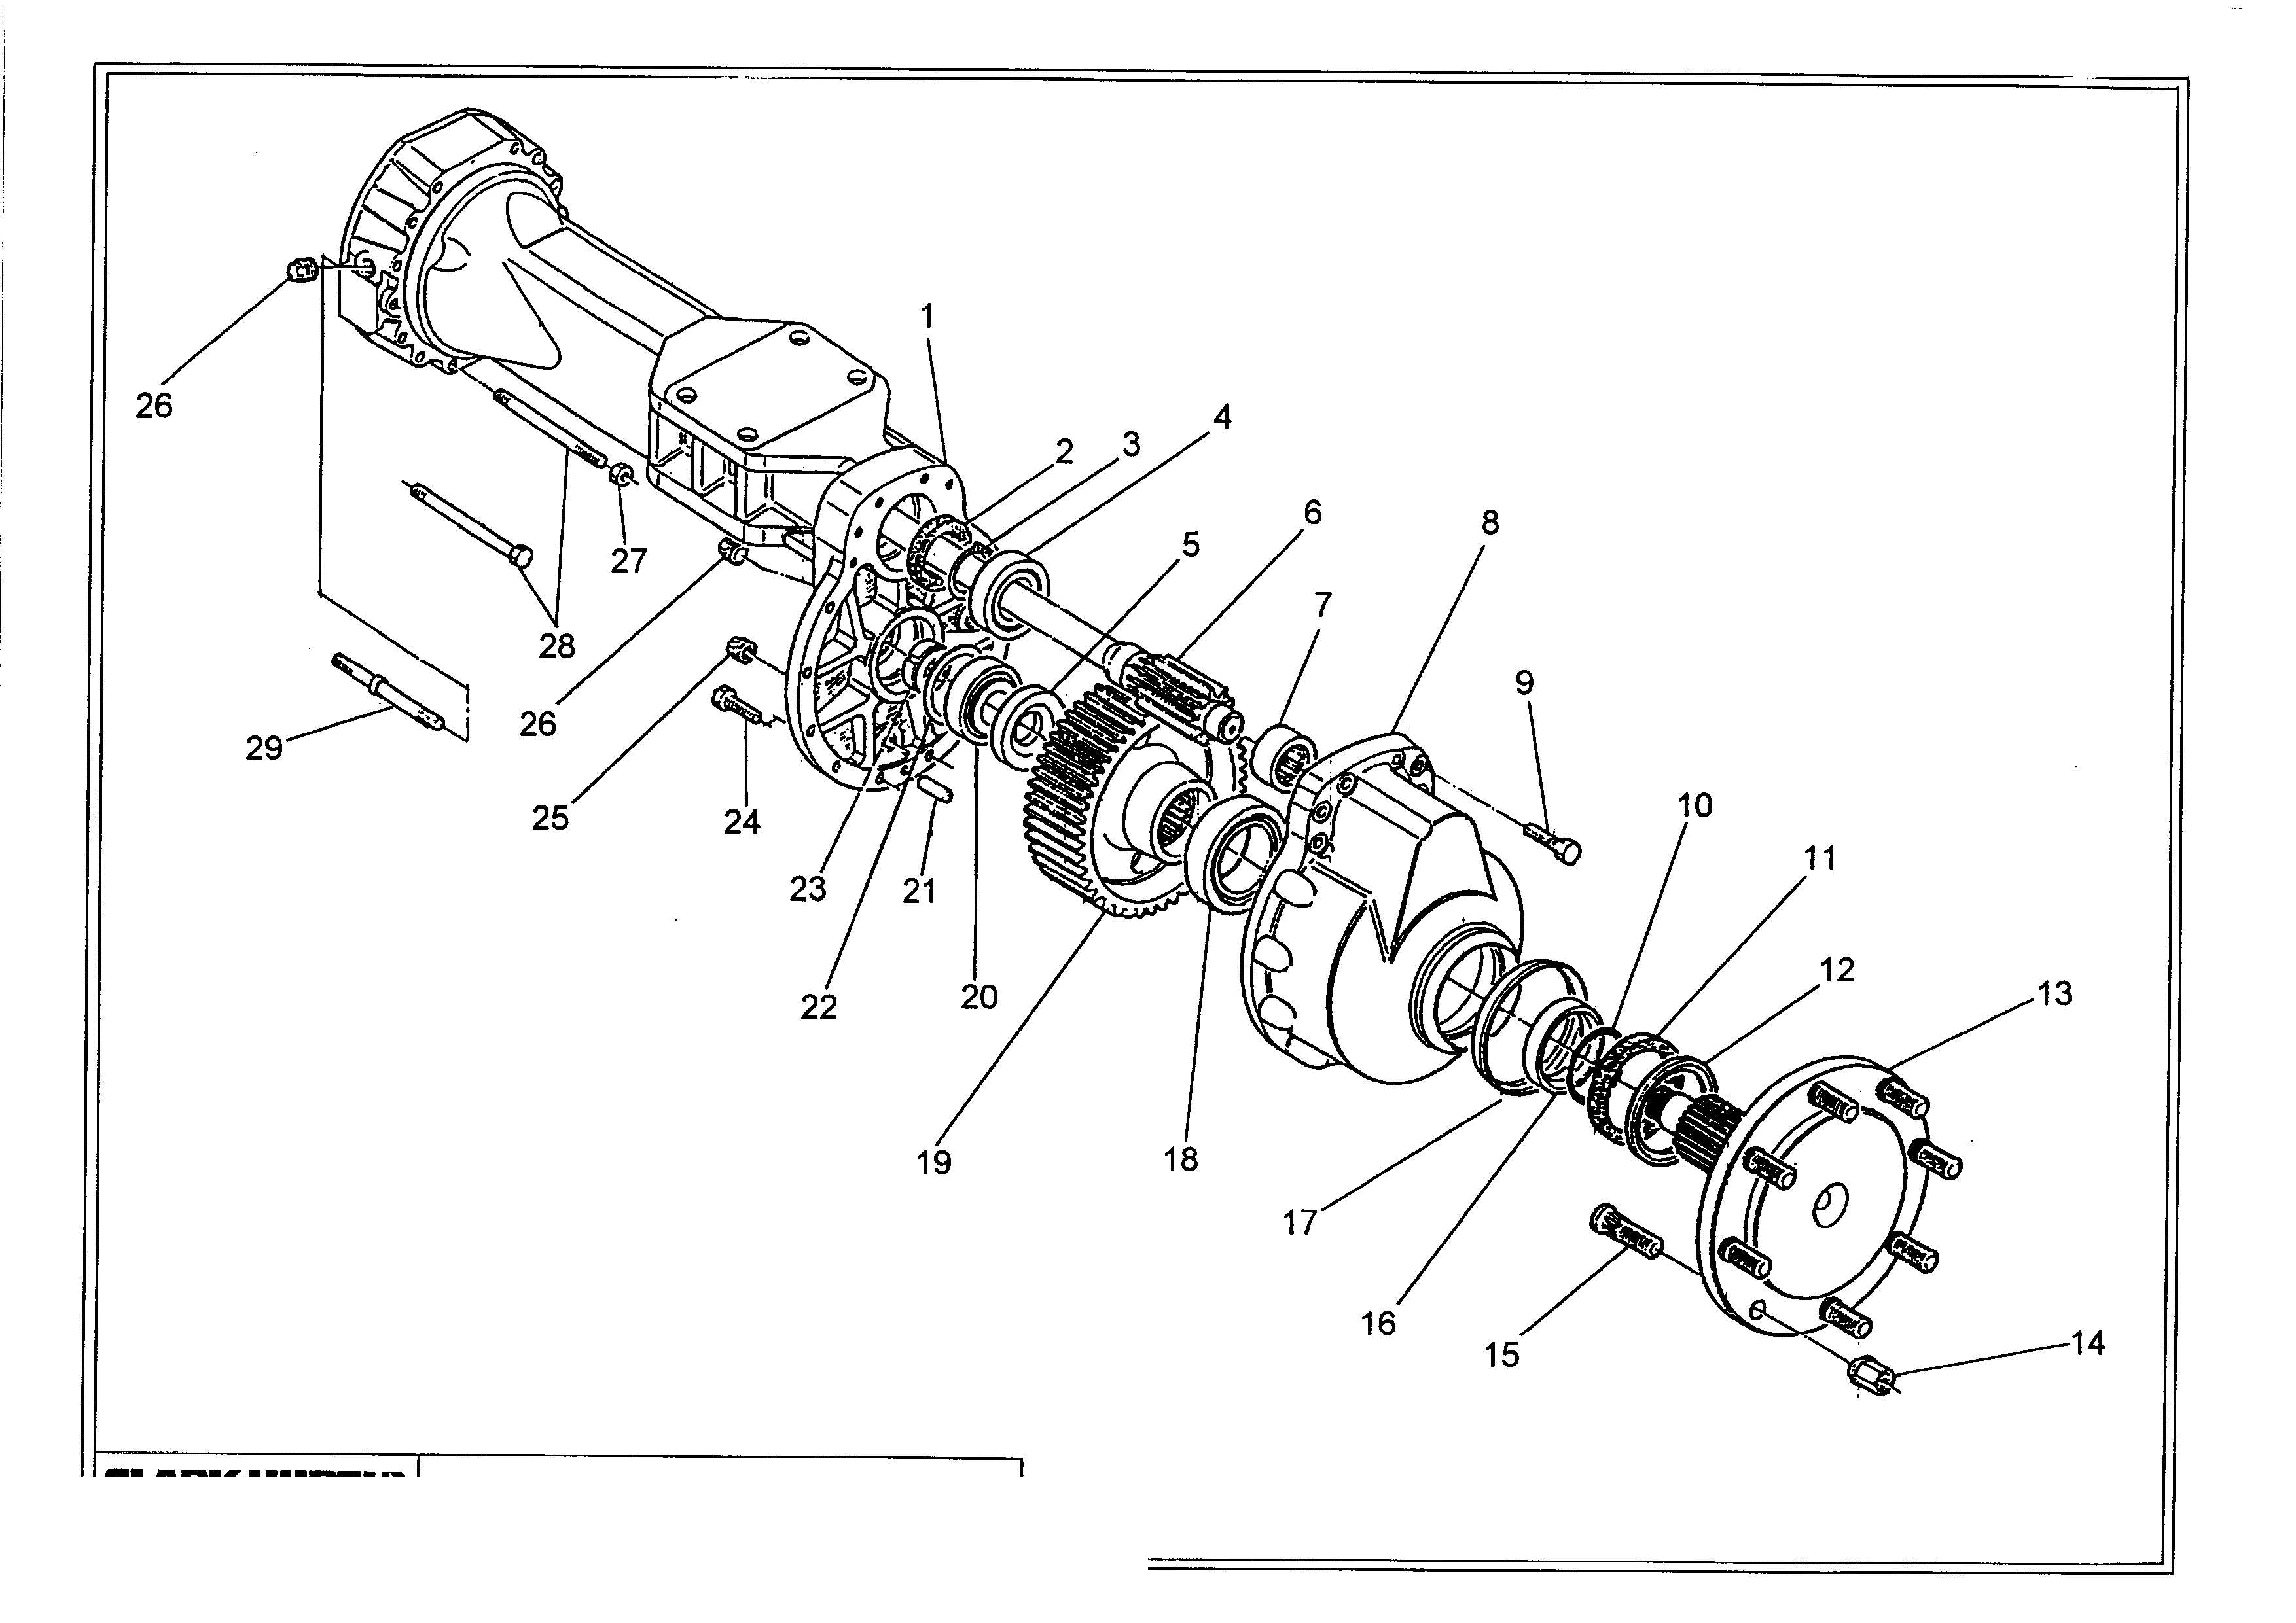 drawing for HSM HOHENLOHER 1437 - DUST EXCLUDER (figure 2)